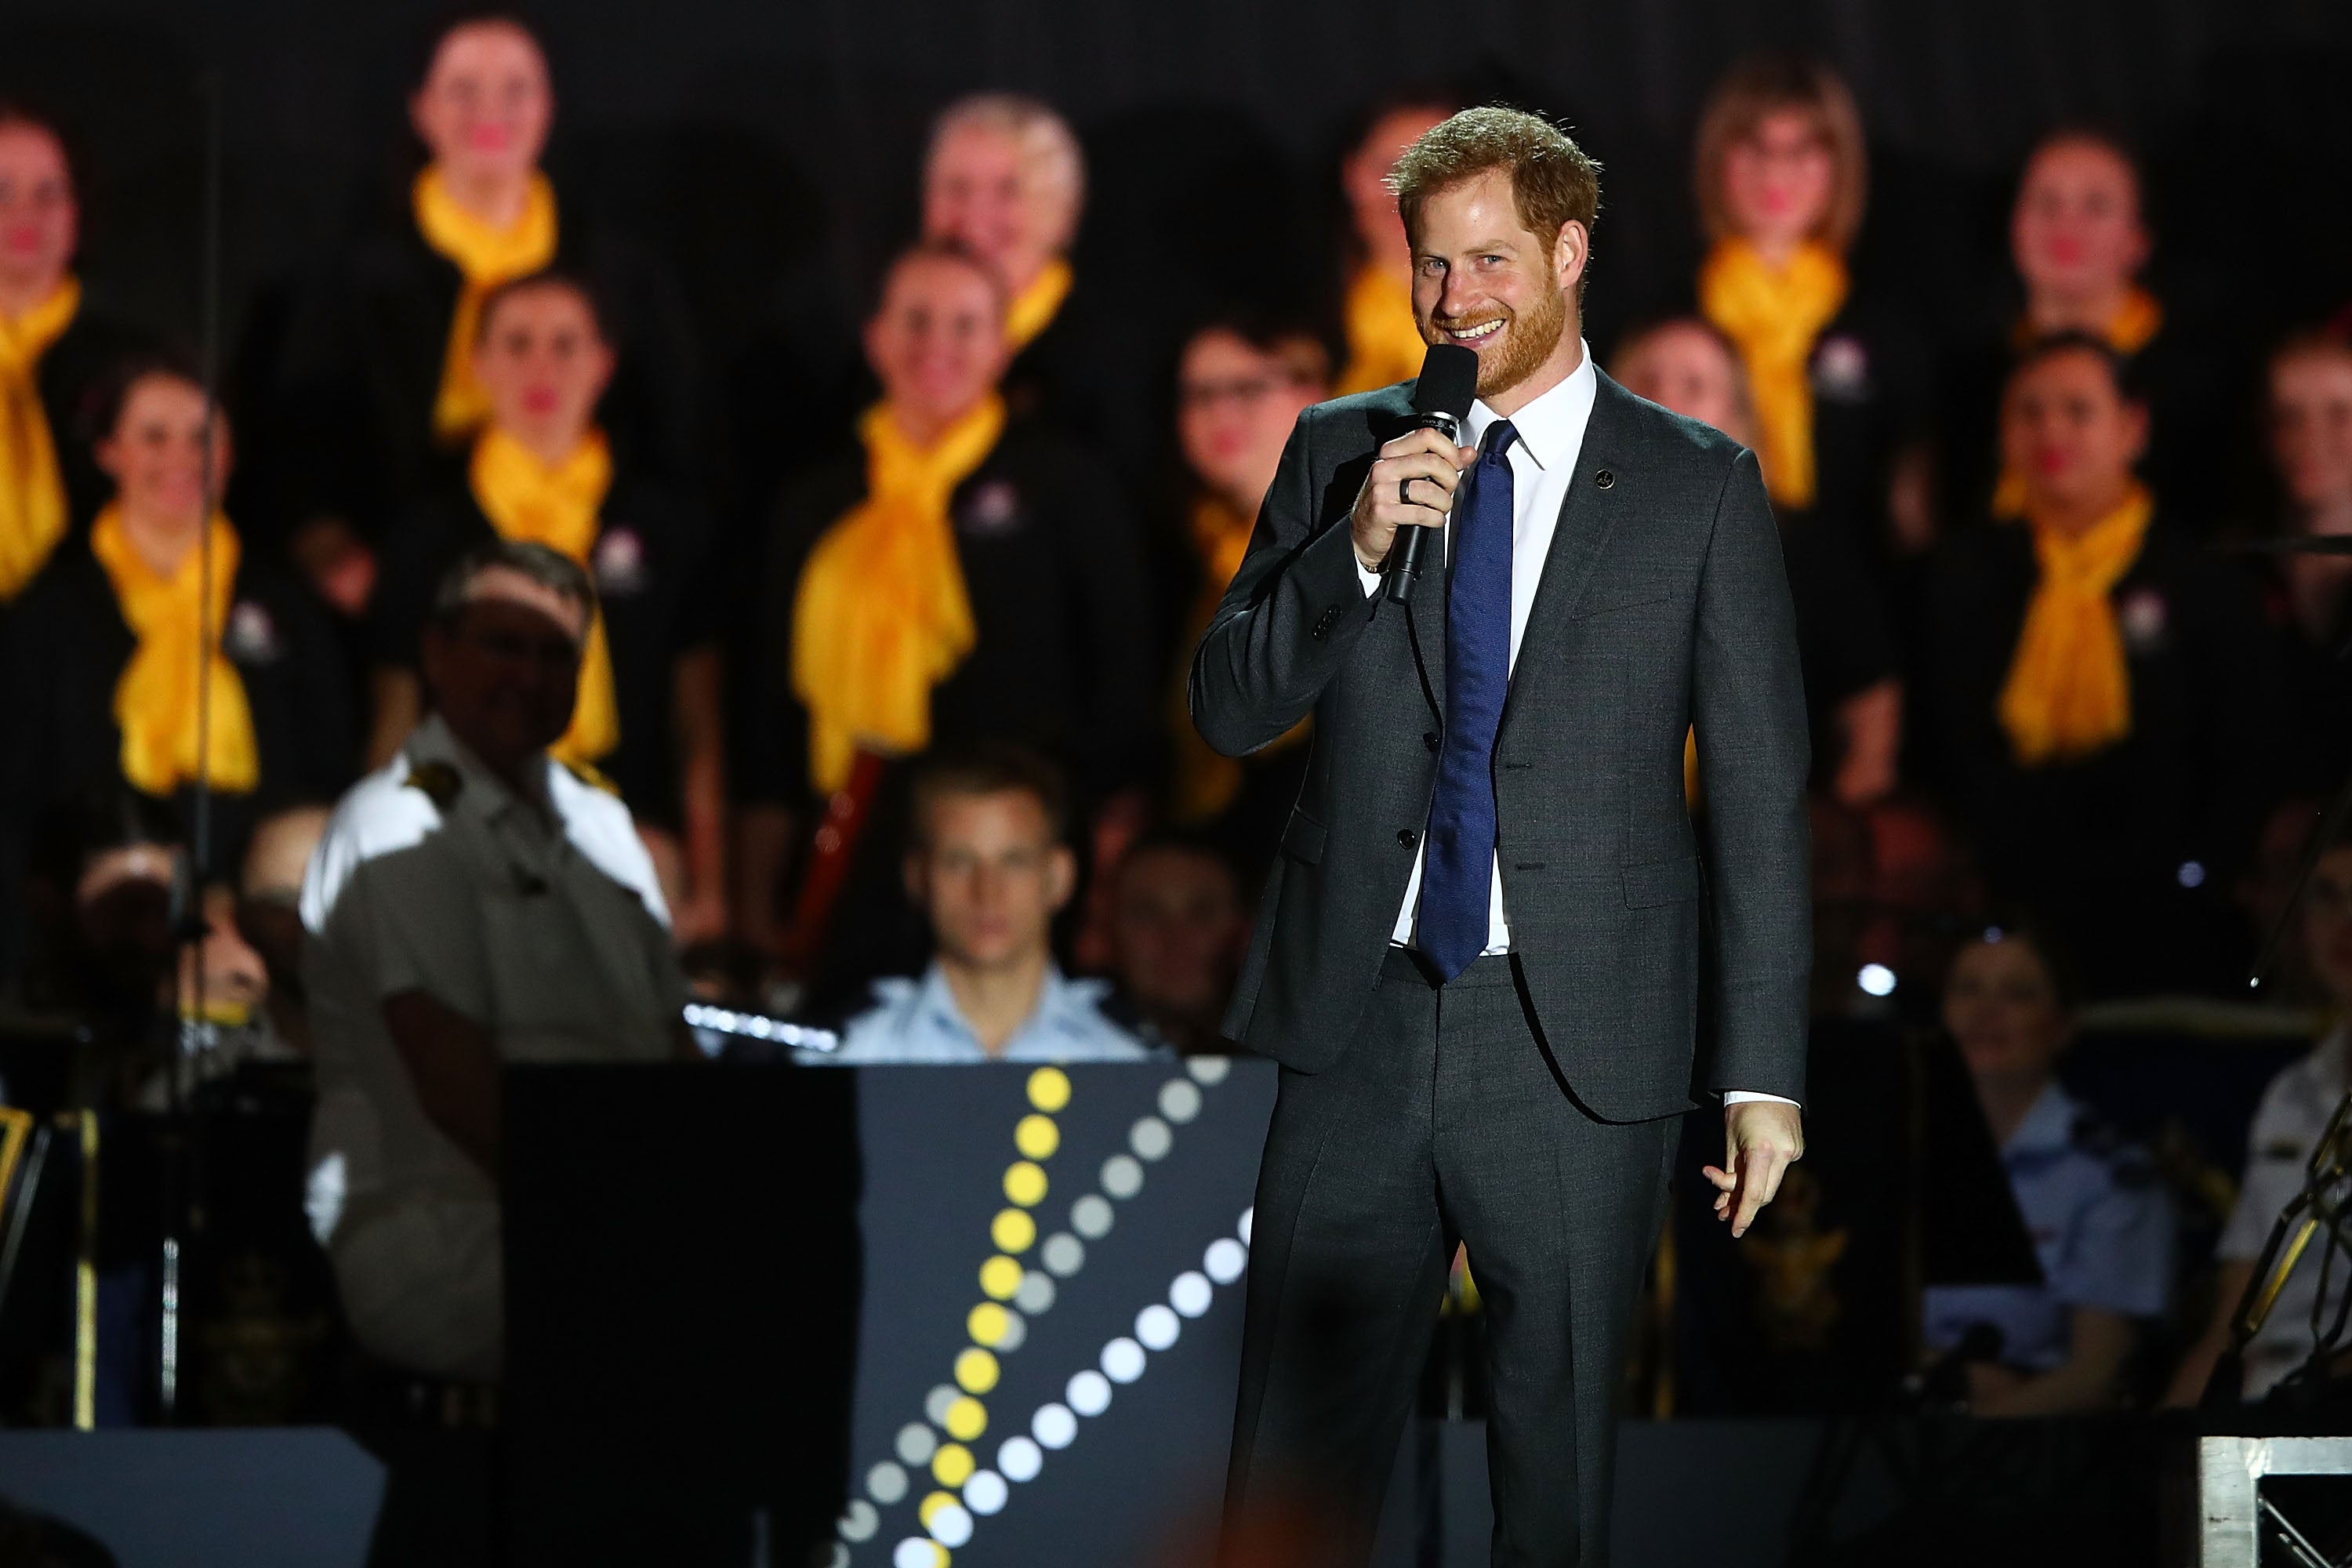 espn, duke of sussex, prince harry, invictus games, espn responds to backlash for giving sports award for veterans to harry: ‘cause worth celebrating’